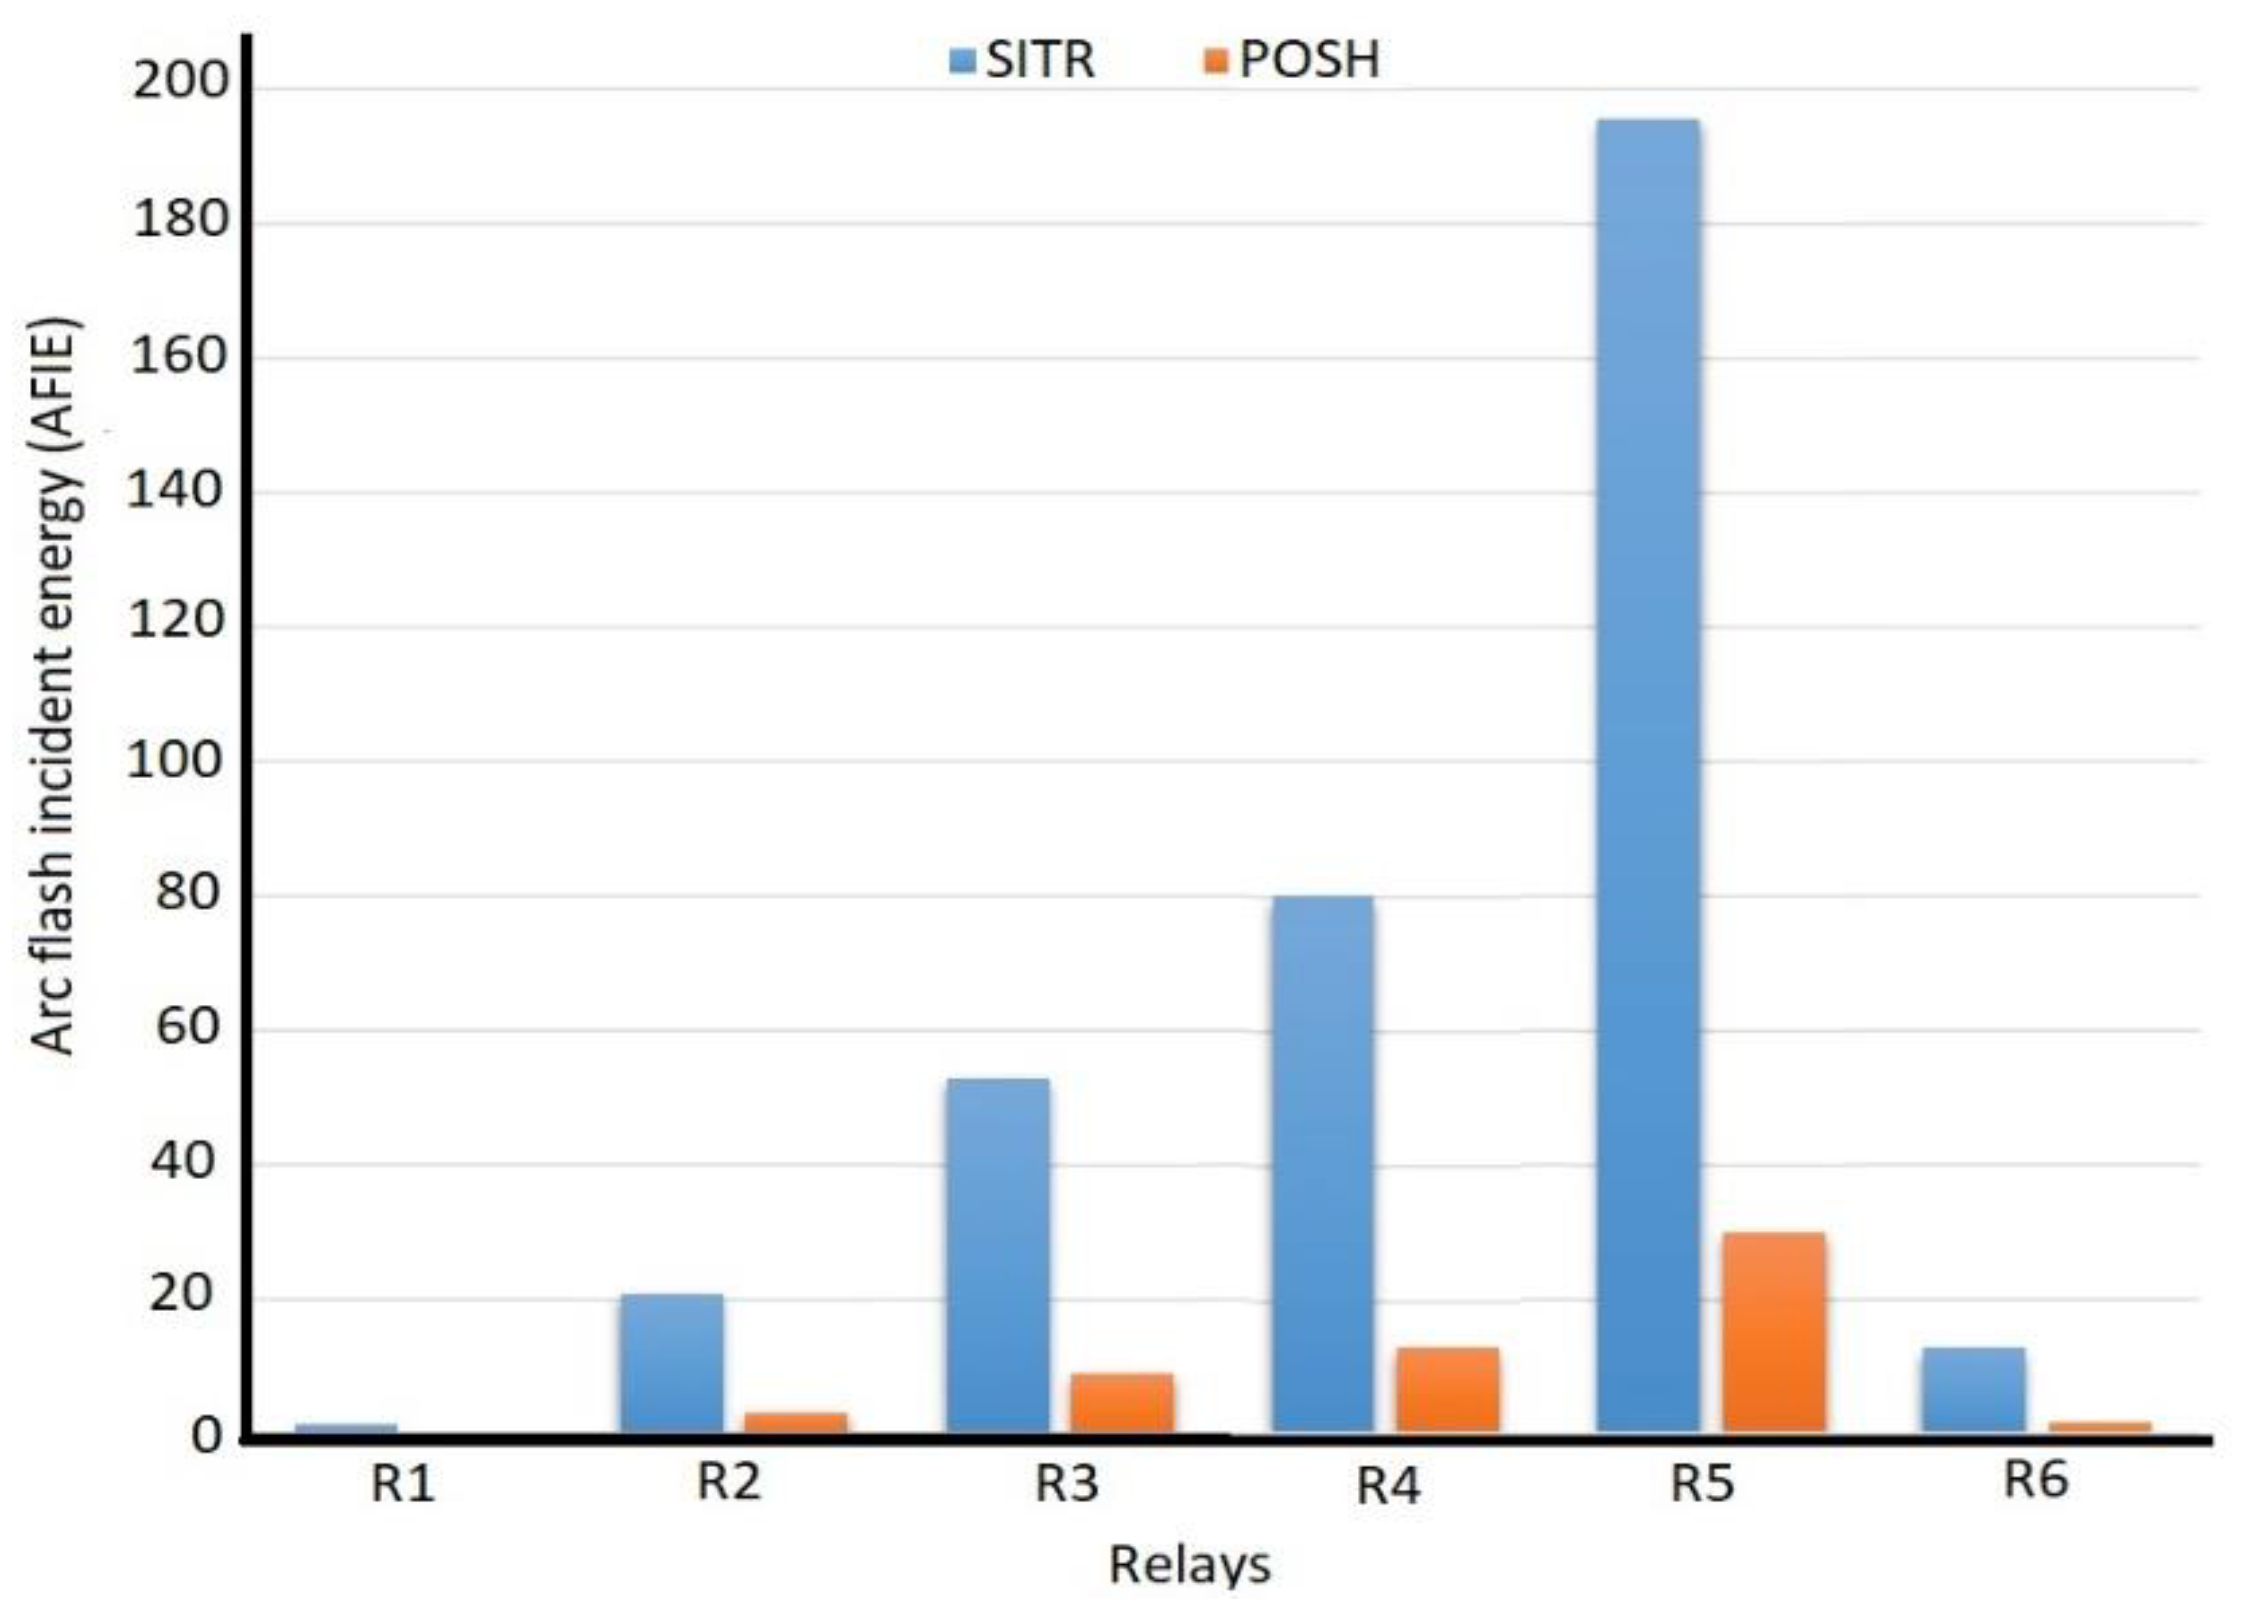 The results of WCOM and PSO algorithms in OOT and elapsed time in Mode